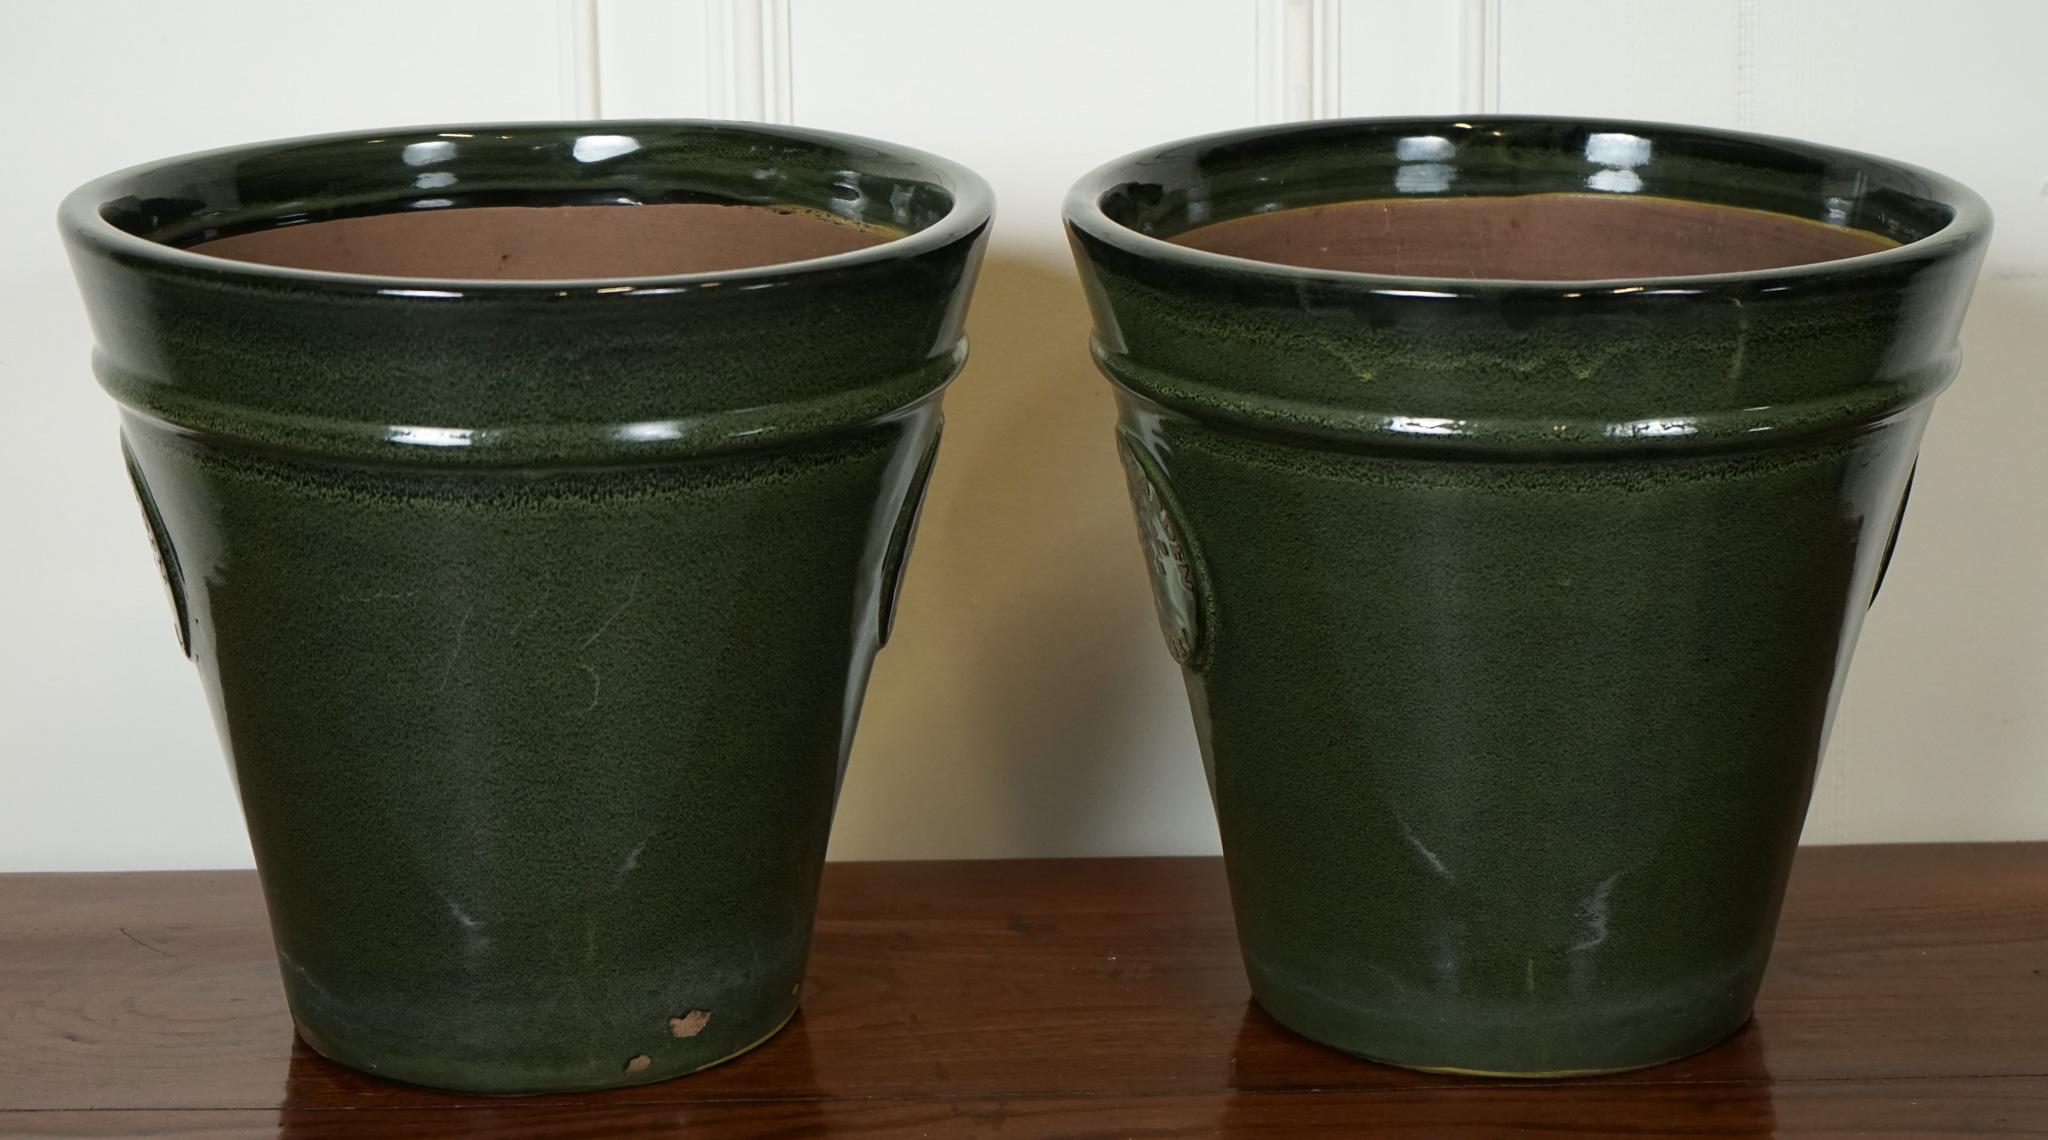 A PAIR OF GREEN EDWARDIAN STYLE FLOWER PLANT POTS BY HERITAGE GARDEN j1 In Good Condition For Sale In Pulborough, GB